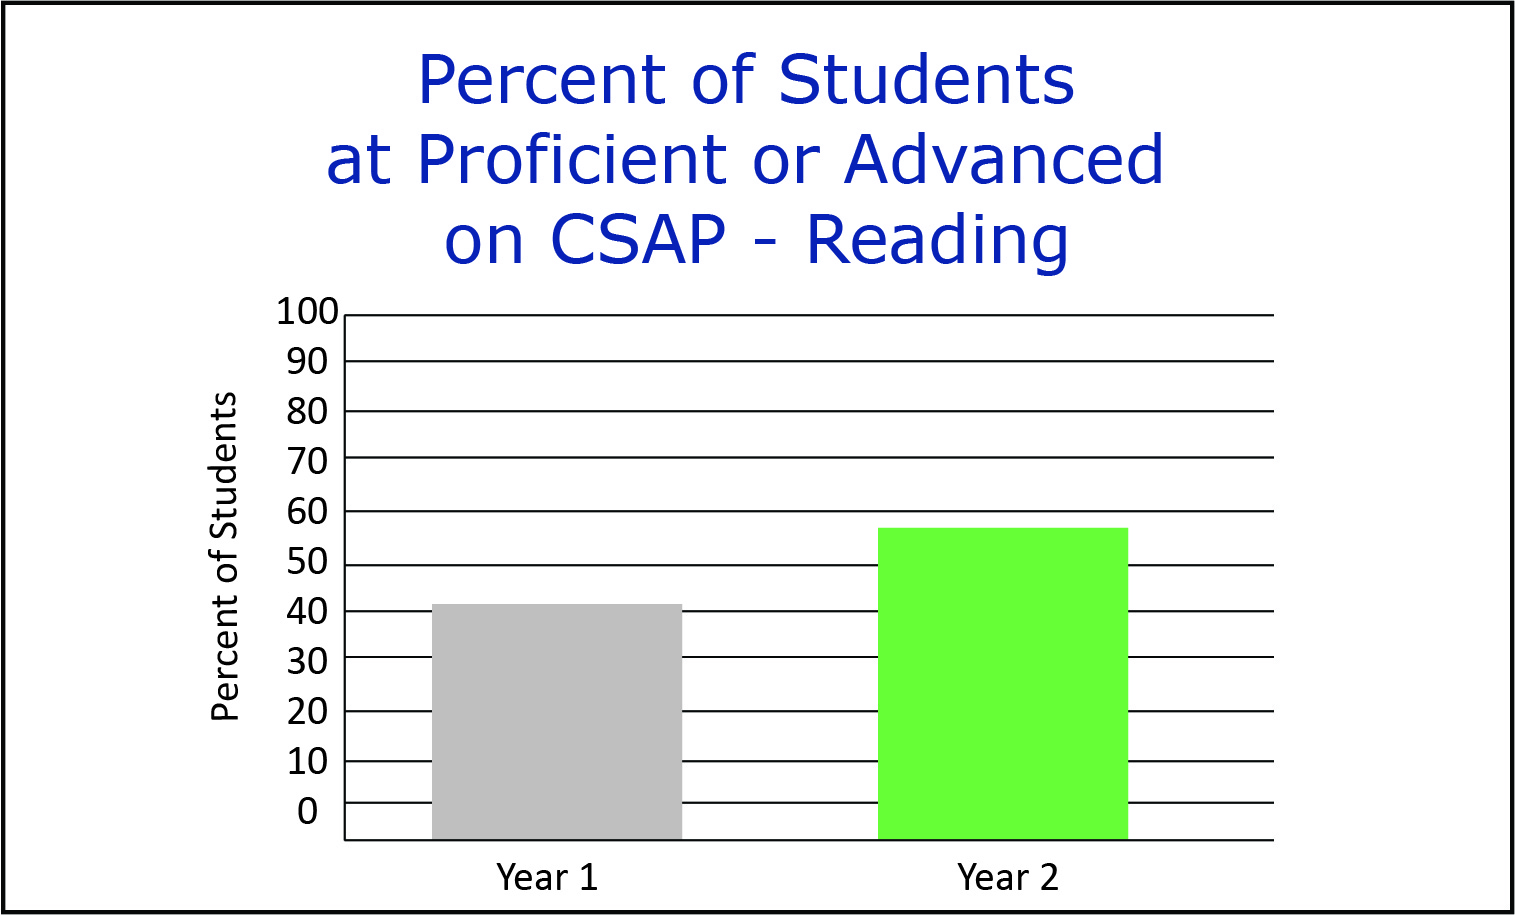 Graph showing improvement in reading from 2009 to 2010